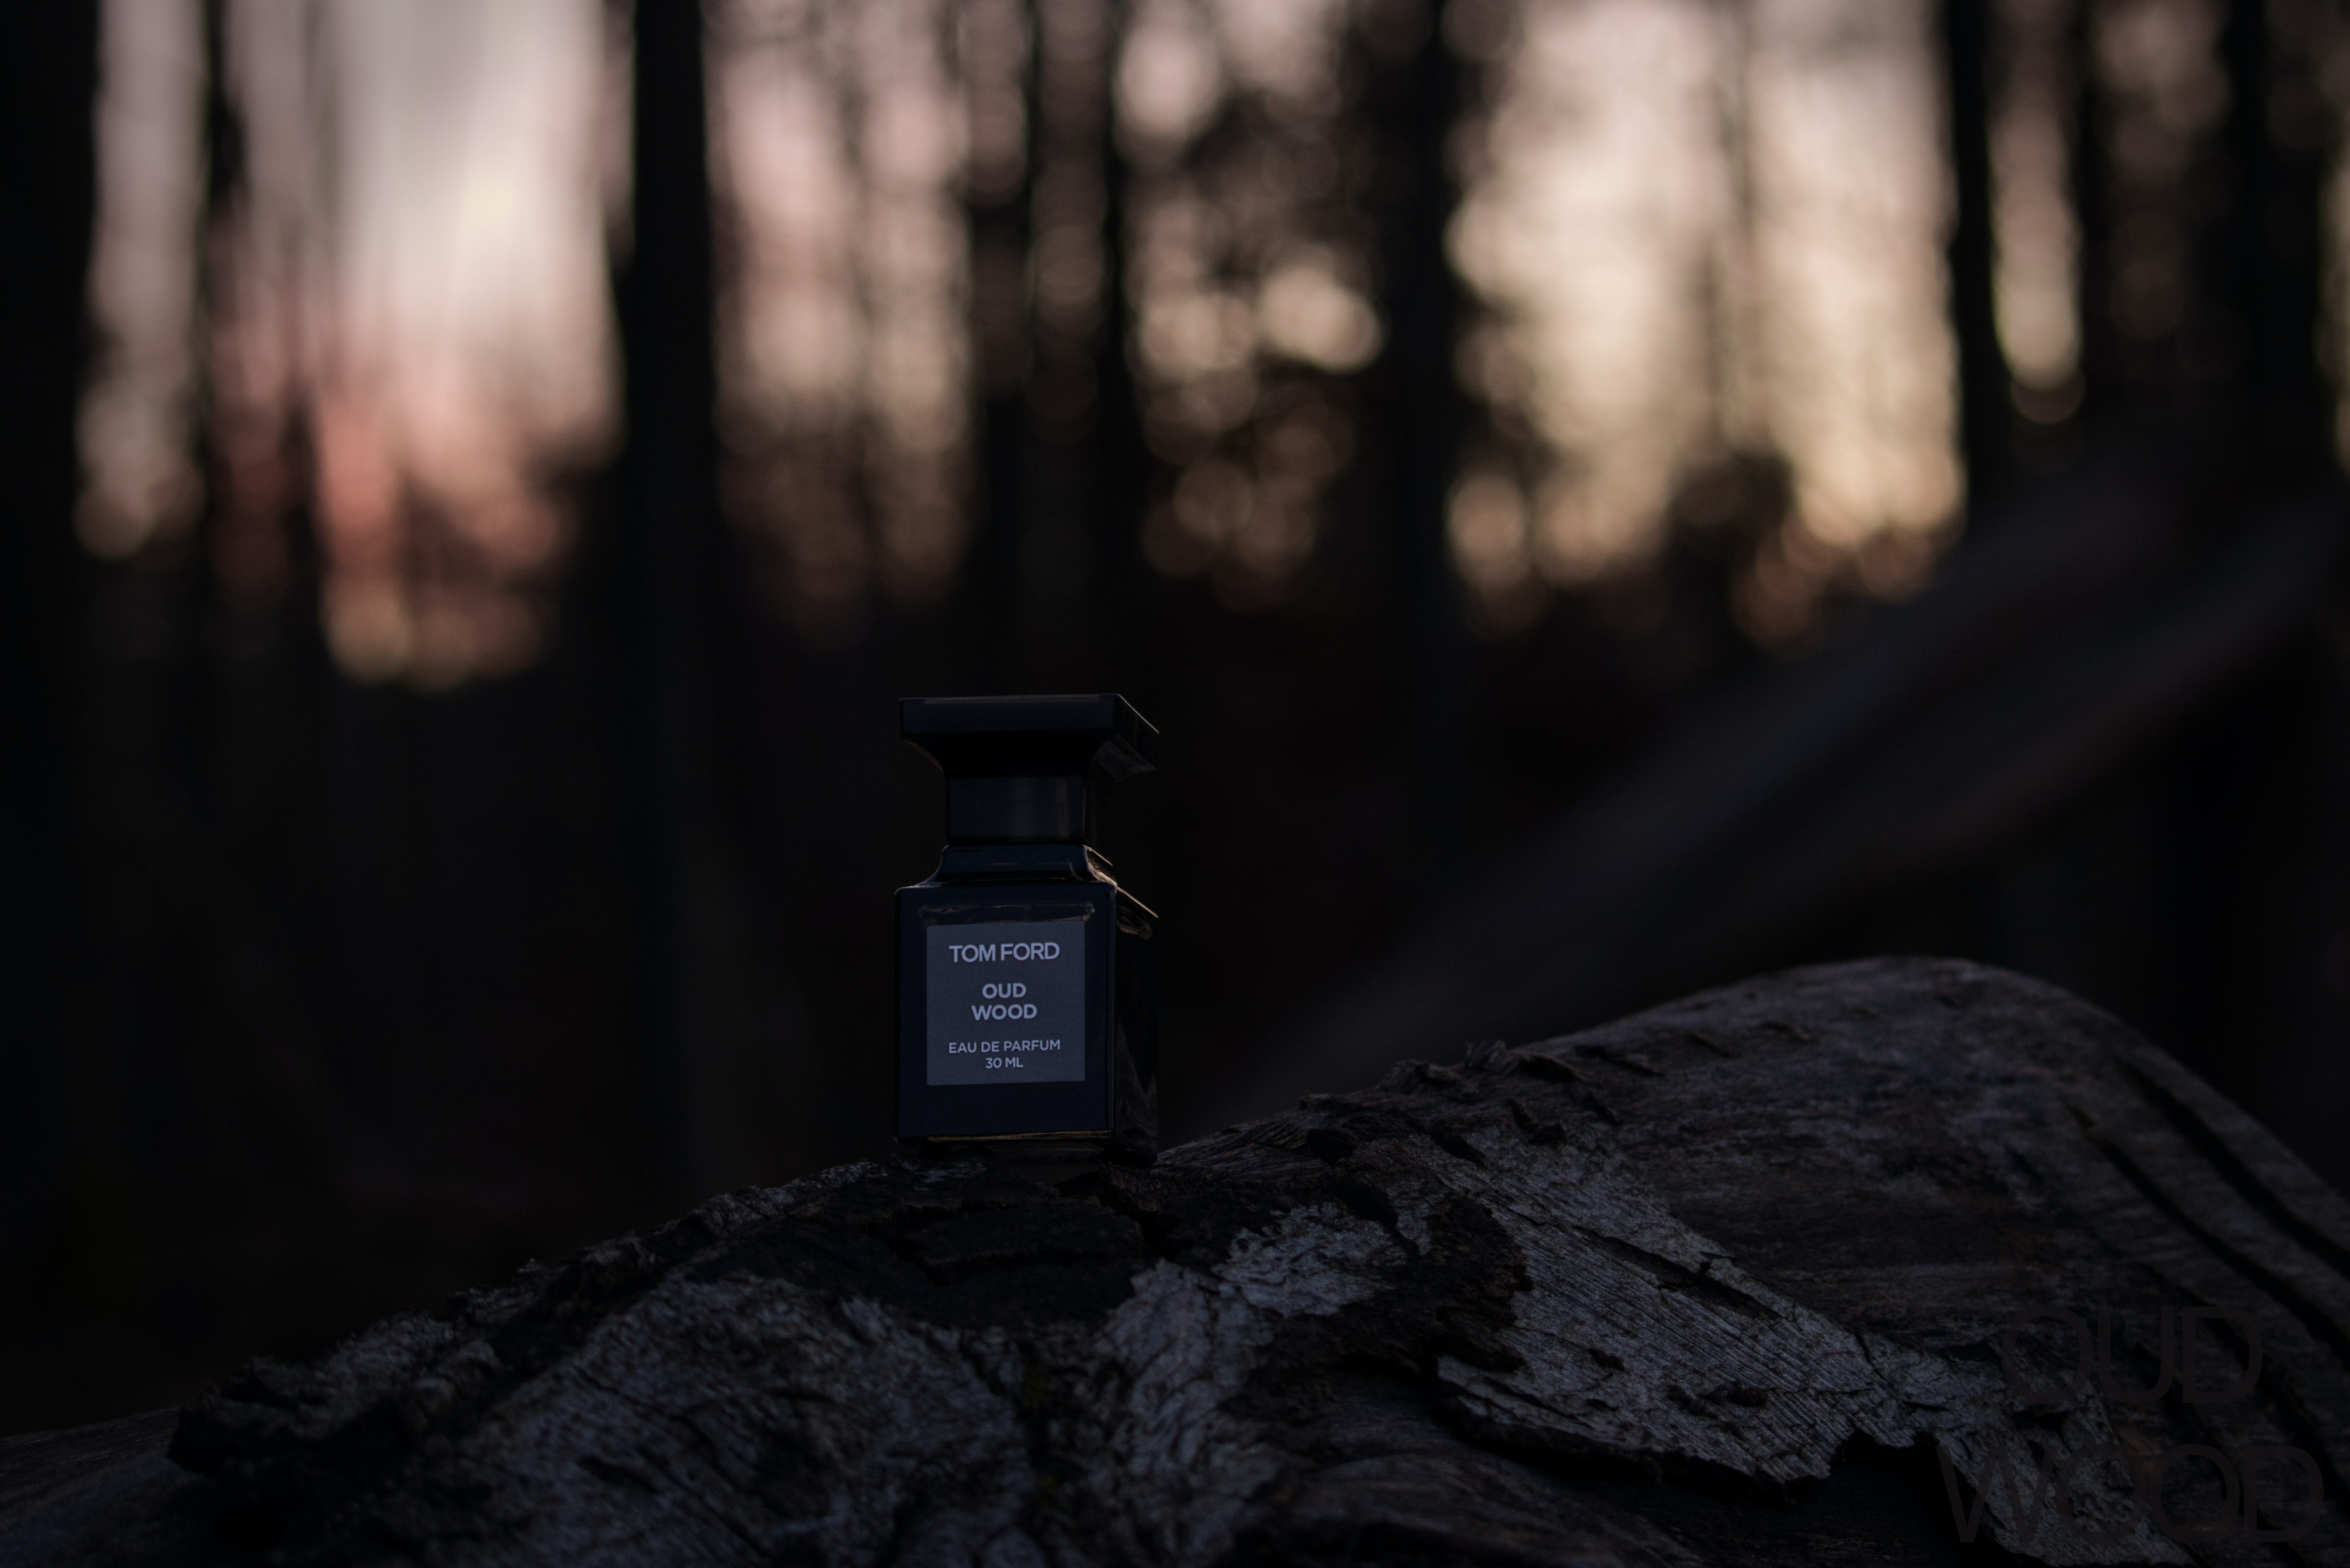 Tom Ford offers a range of fragrances | Photo by Ben Seibel from Unsplash